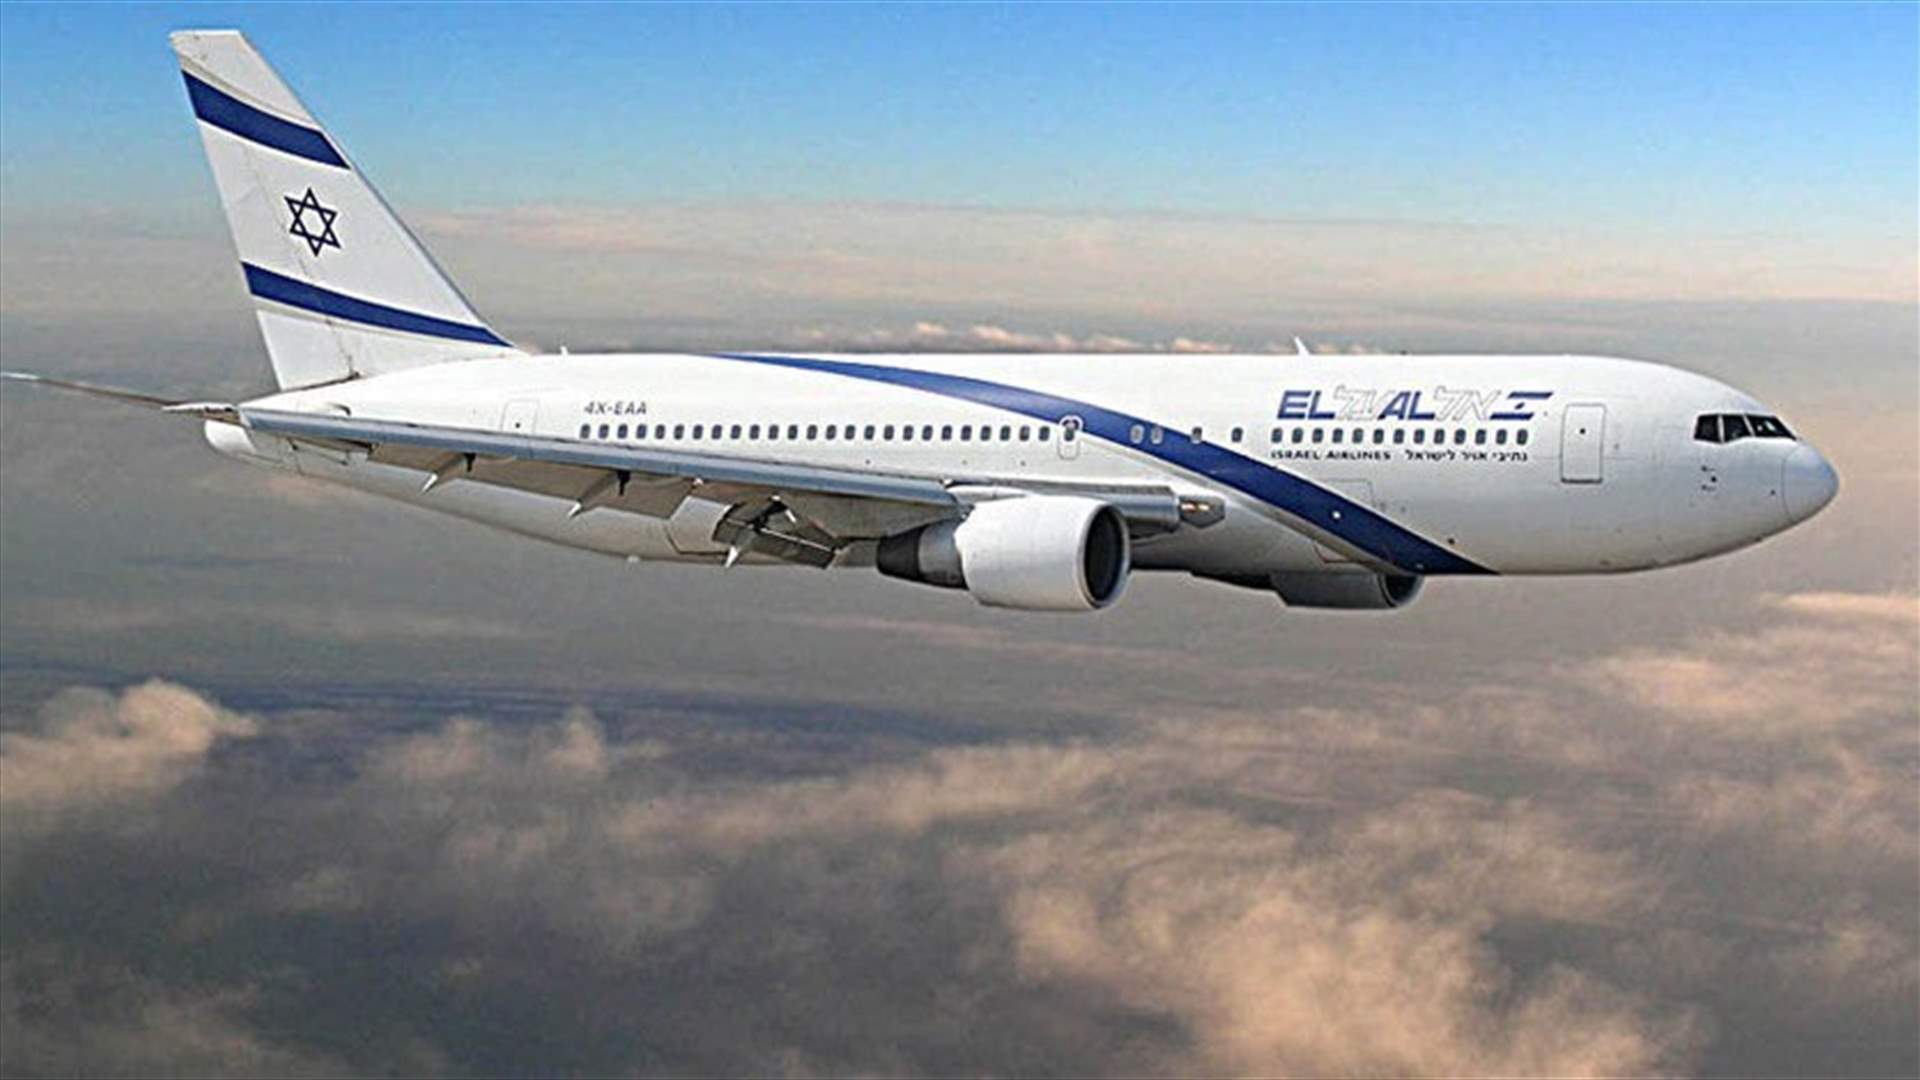 Israel says GPS mysteriously disrupted in its airspace but planes secure